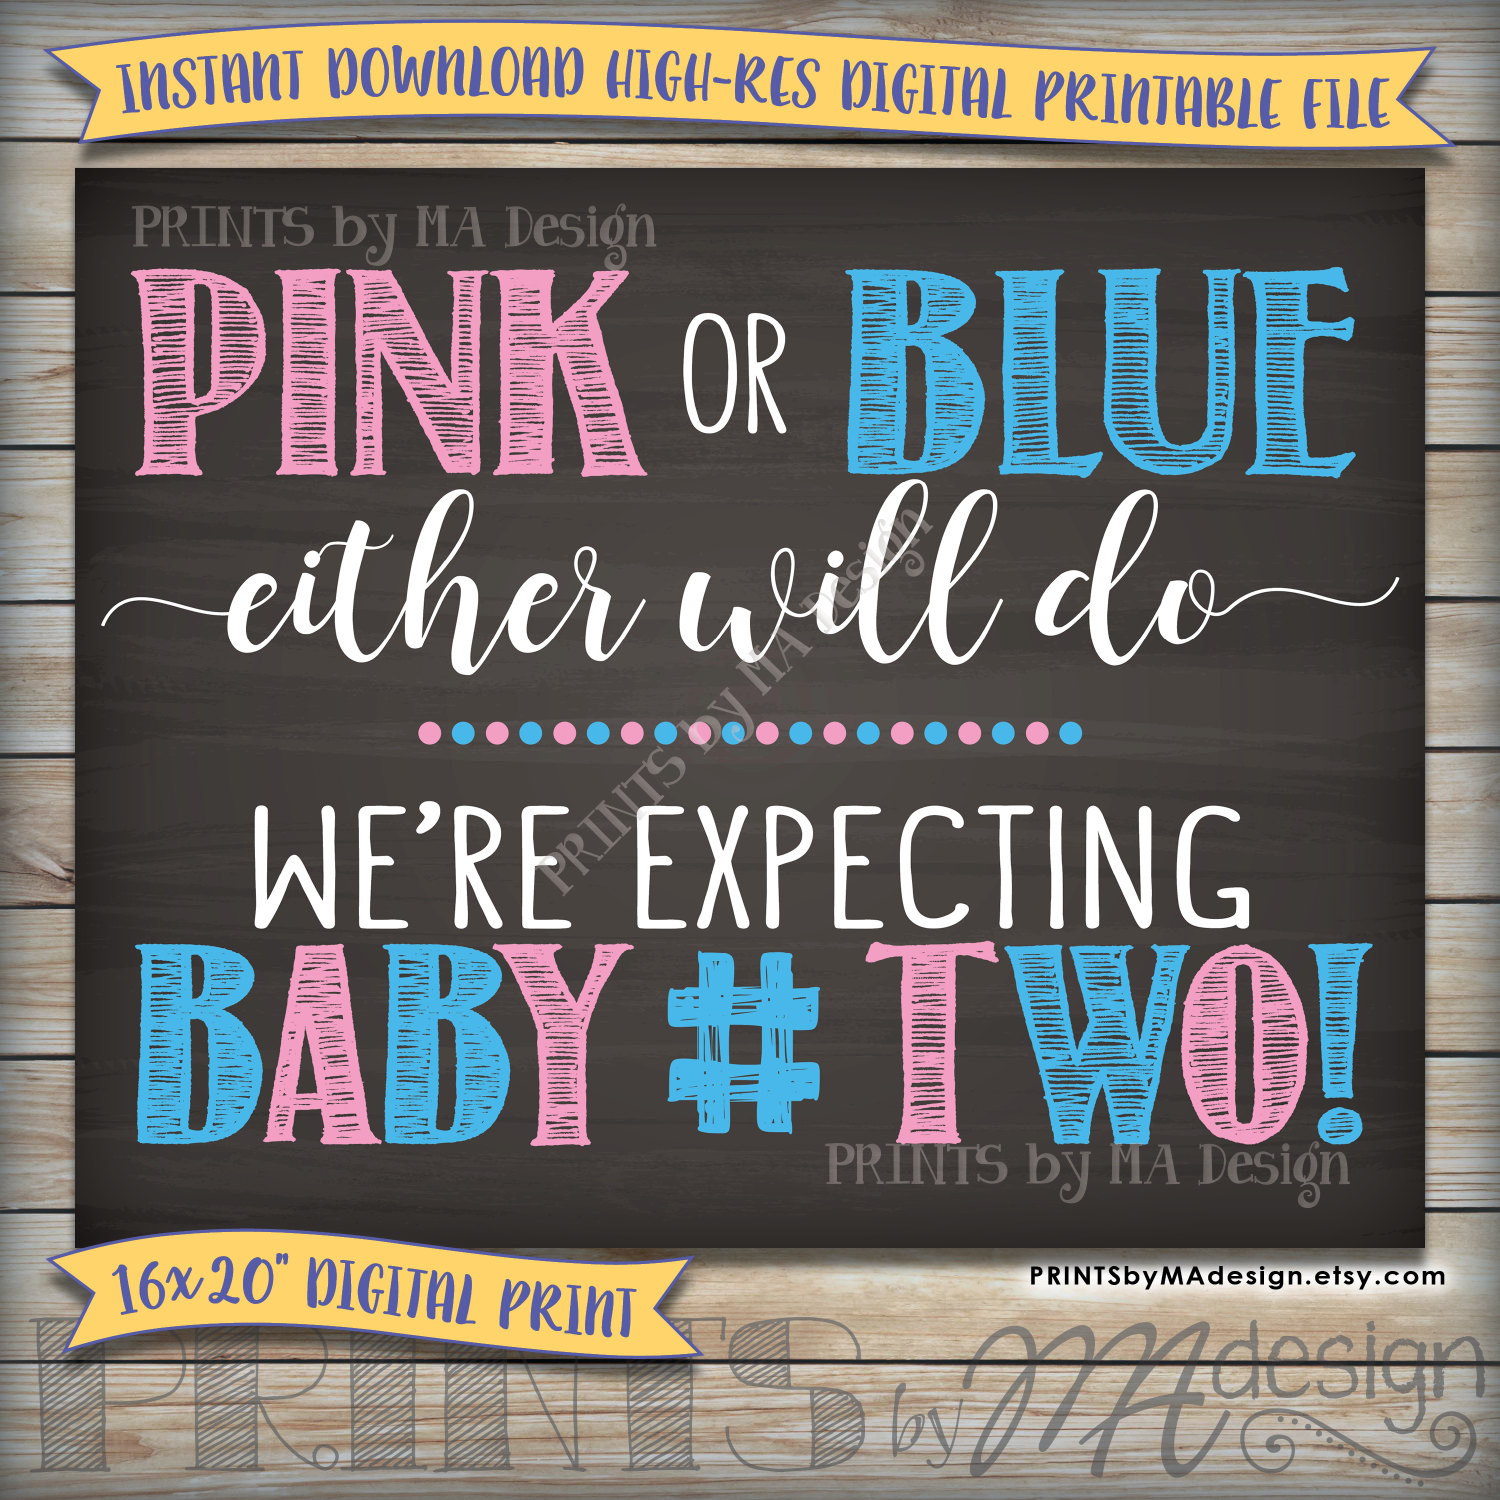 Baby Number 2 Quotes
 Pink or Blue Either Will Do Baby Number 2 Pregnancy